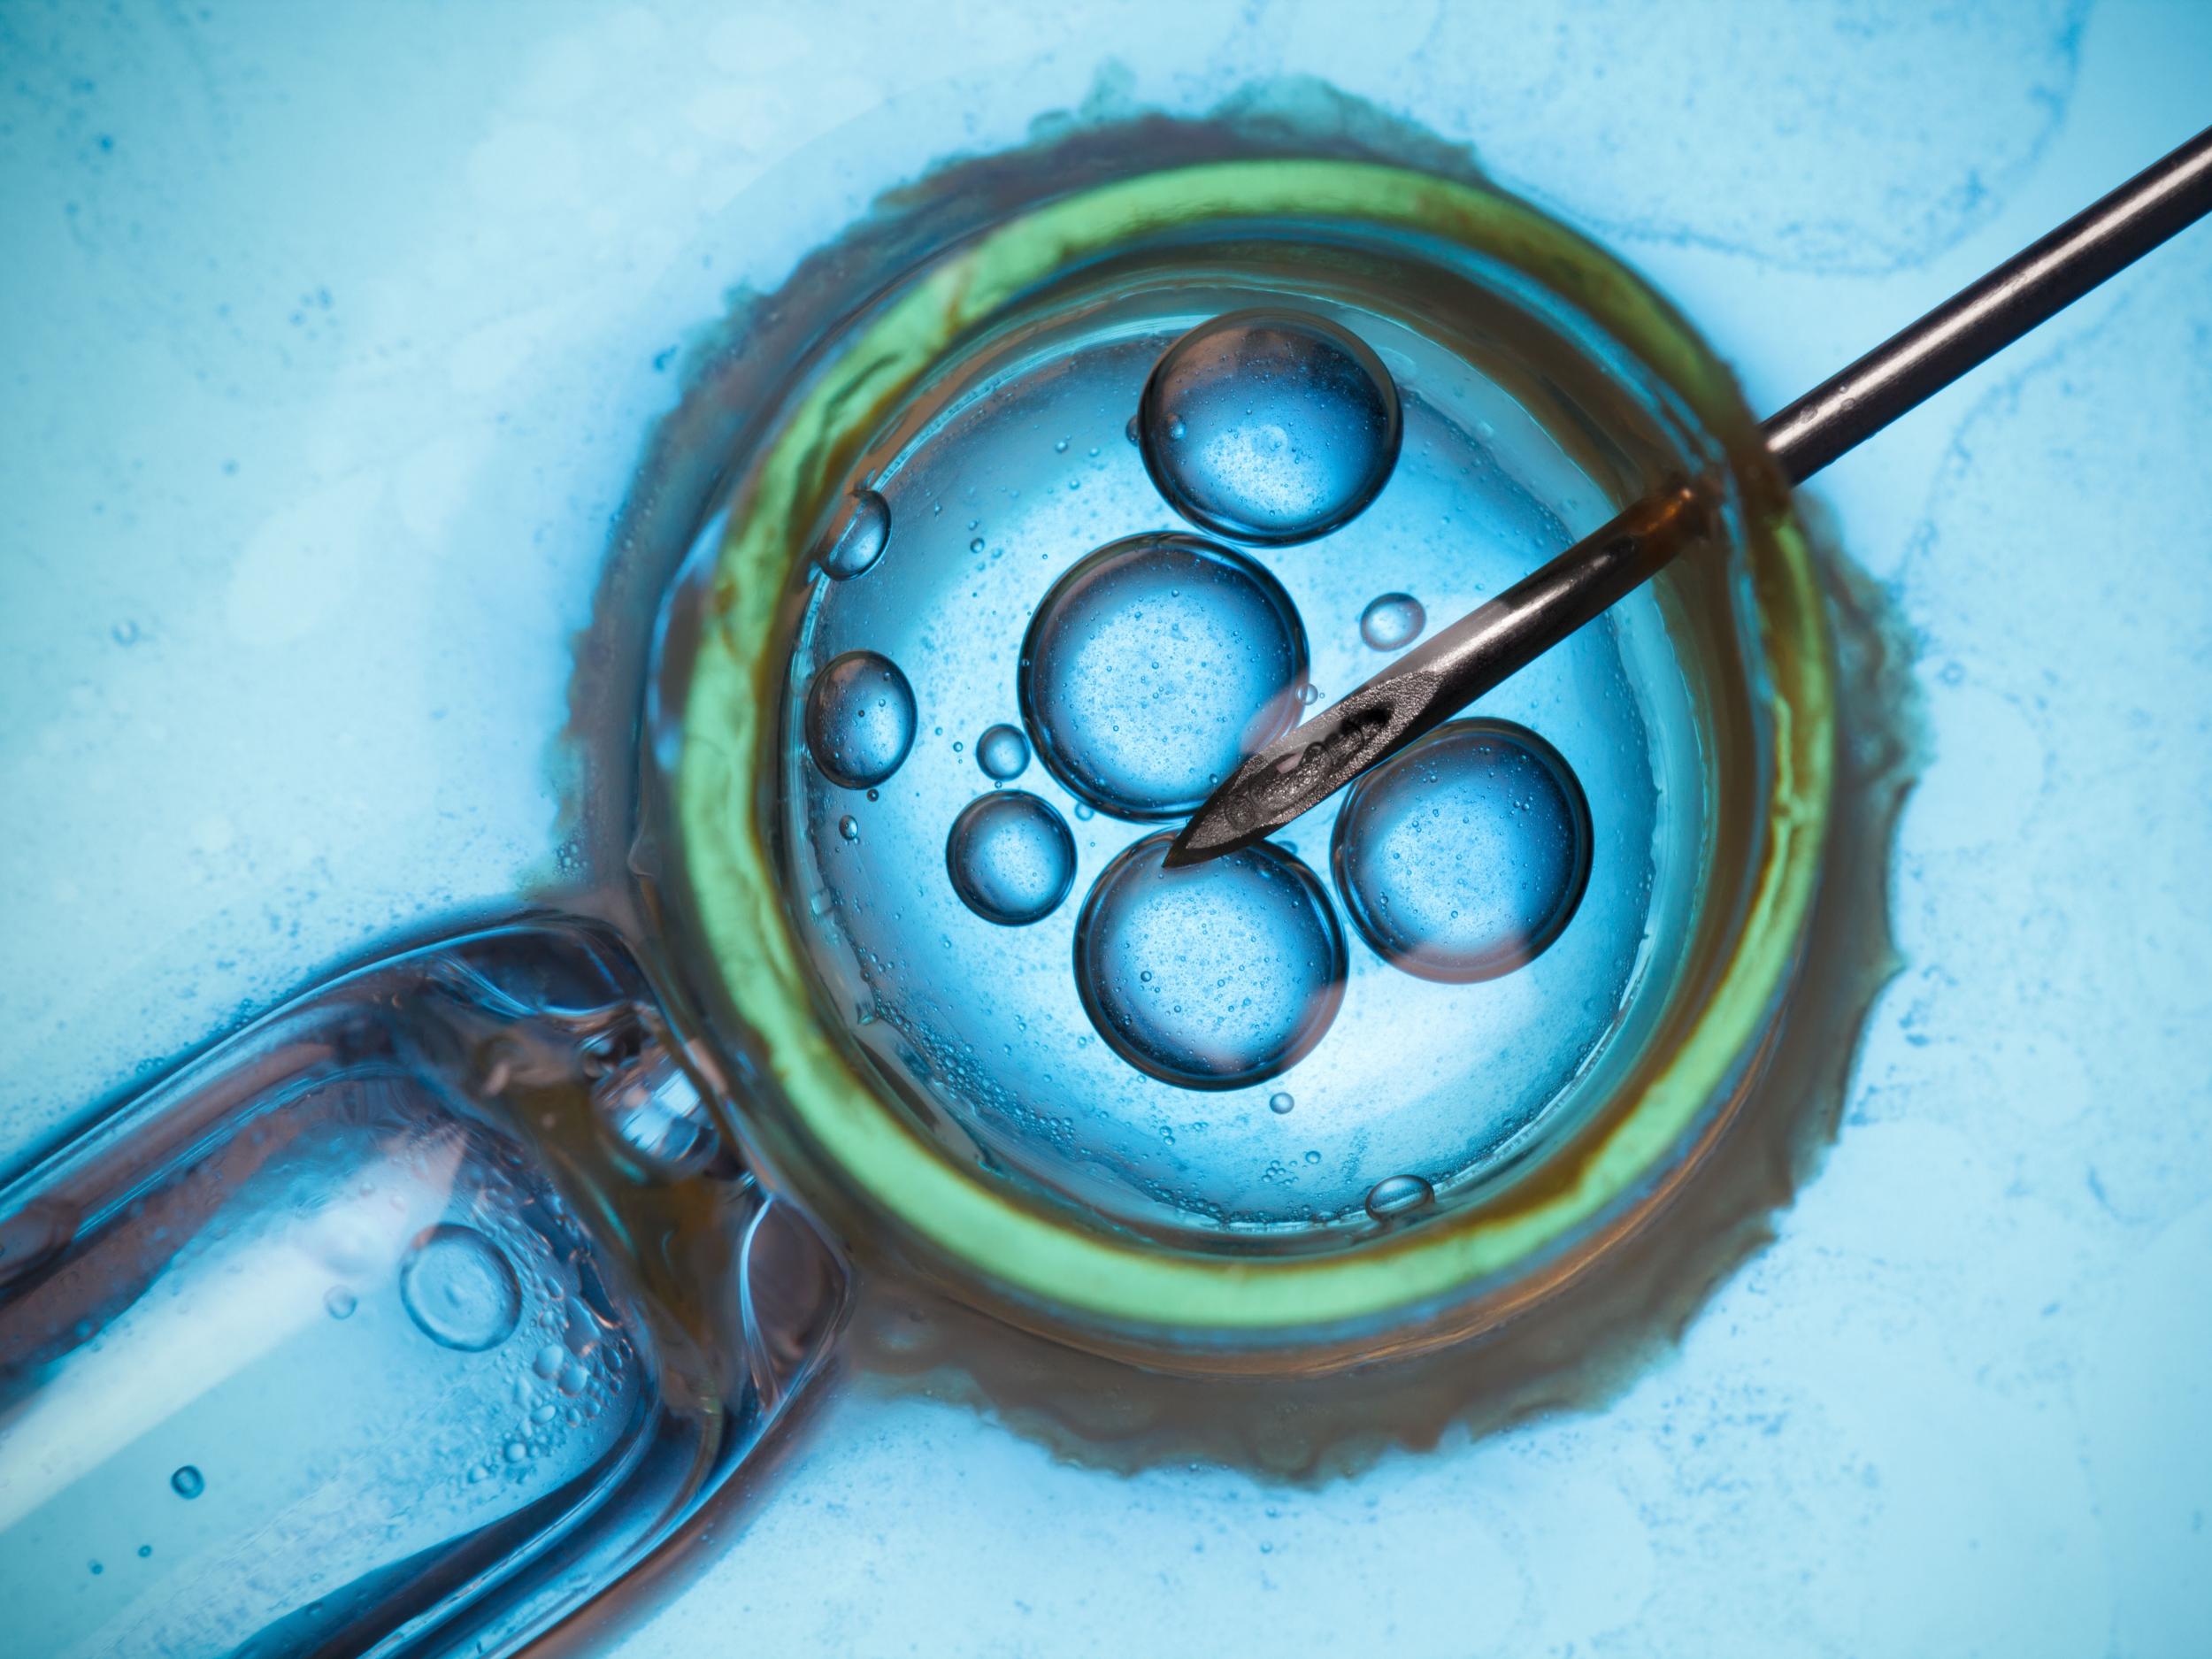 Some people say many IVF procedures have not been subject to sufficient medical scrutiny